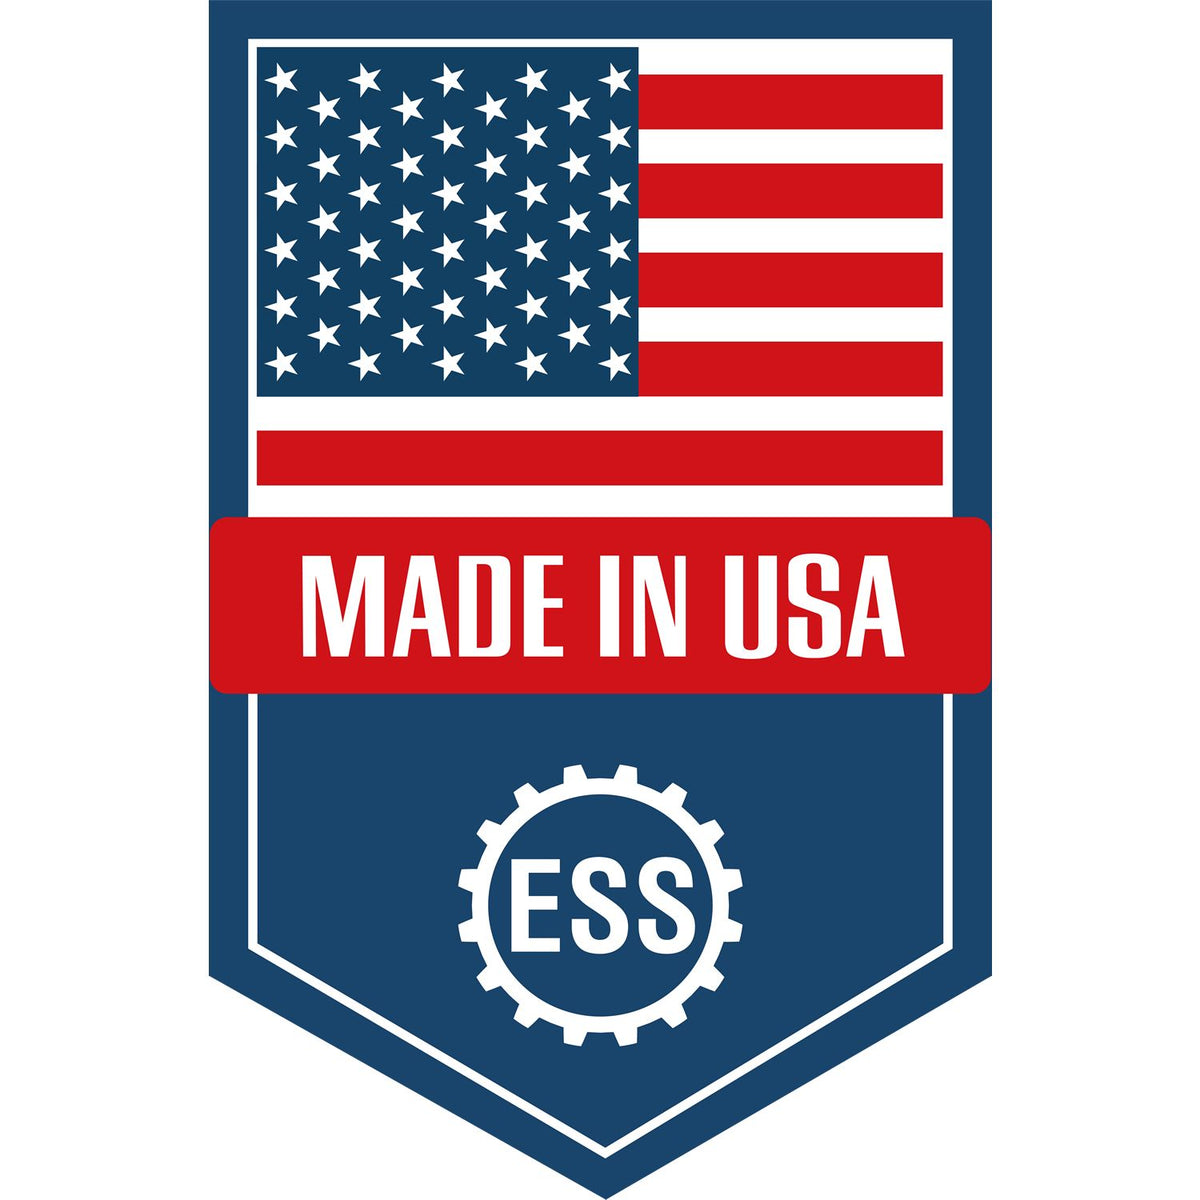 An icon or graphic with an american flag and text reading Made in USA for the Premium MaxLight Pre-Inked Maryland Landscape Architects Stamp